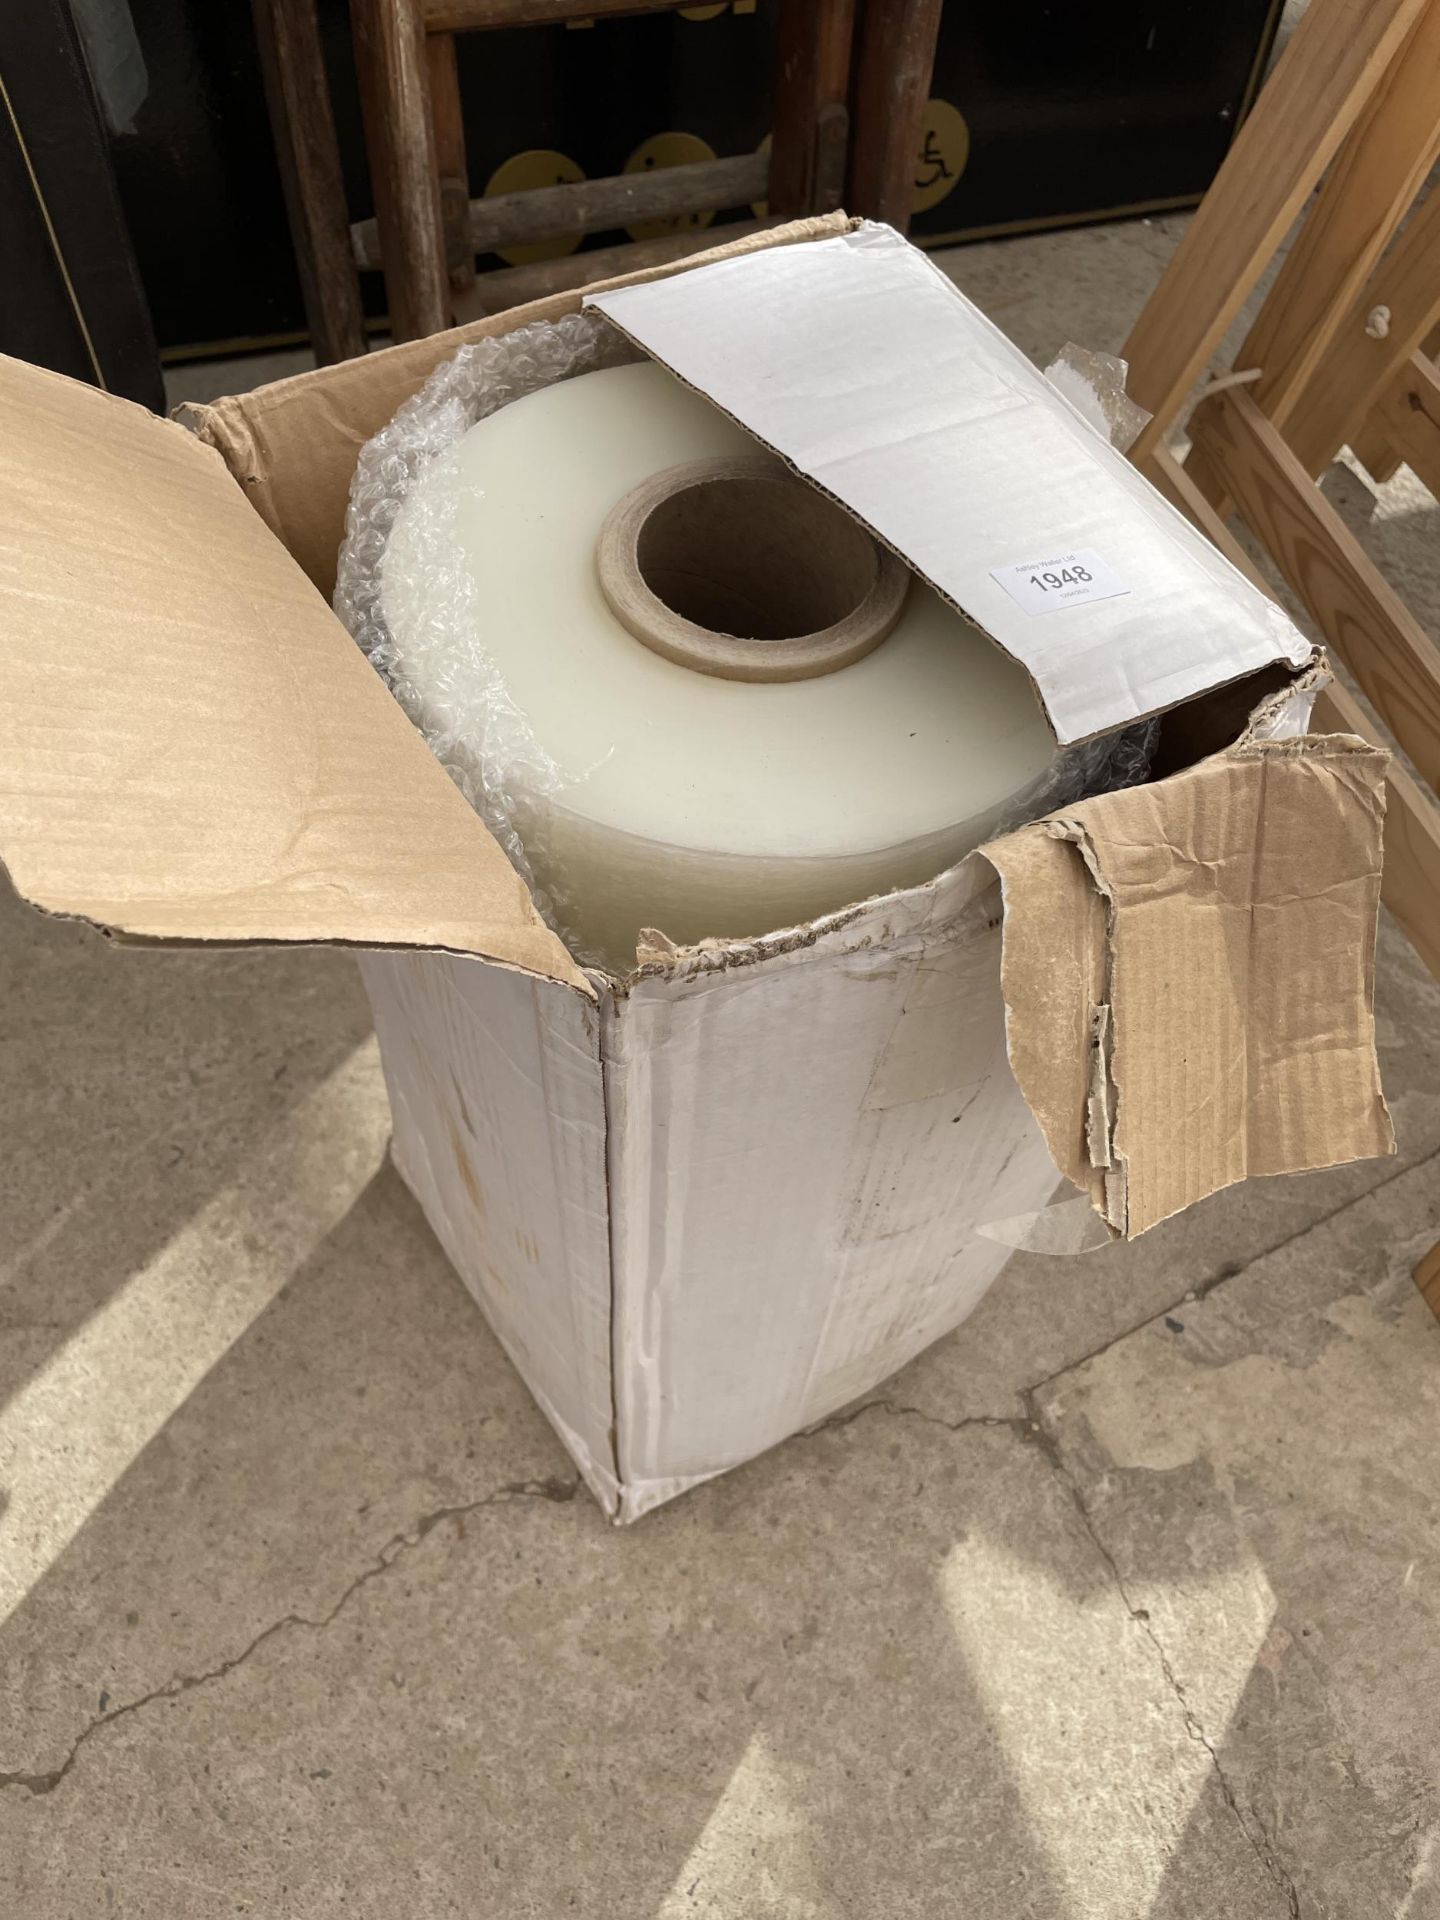 A LARGE ROLL OF SHRINK WRAP